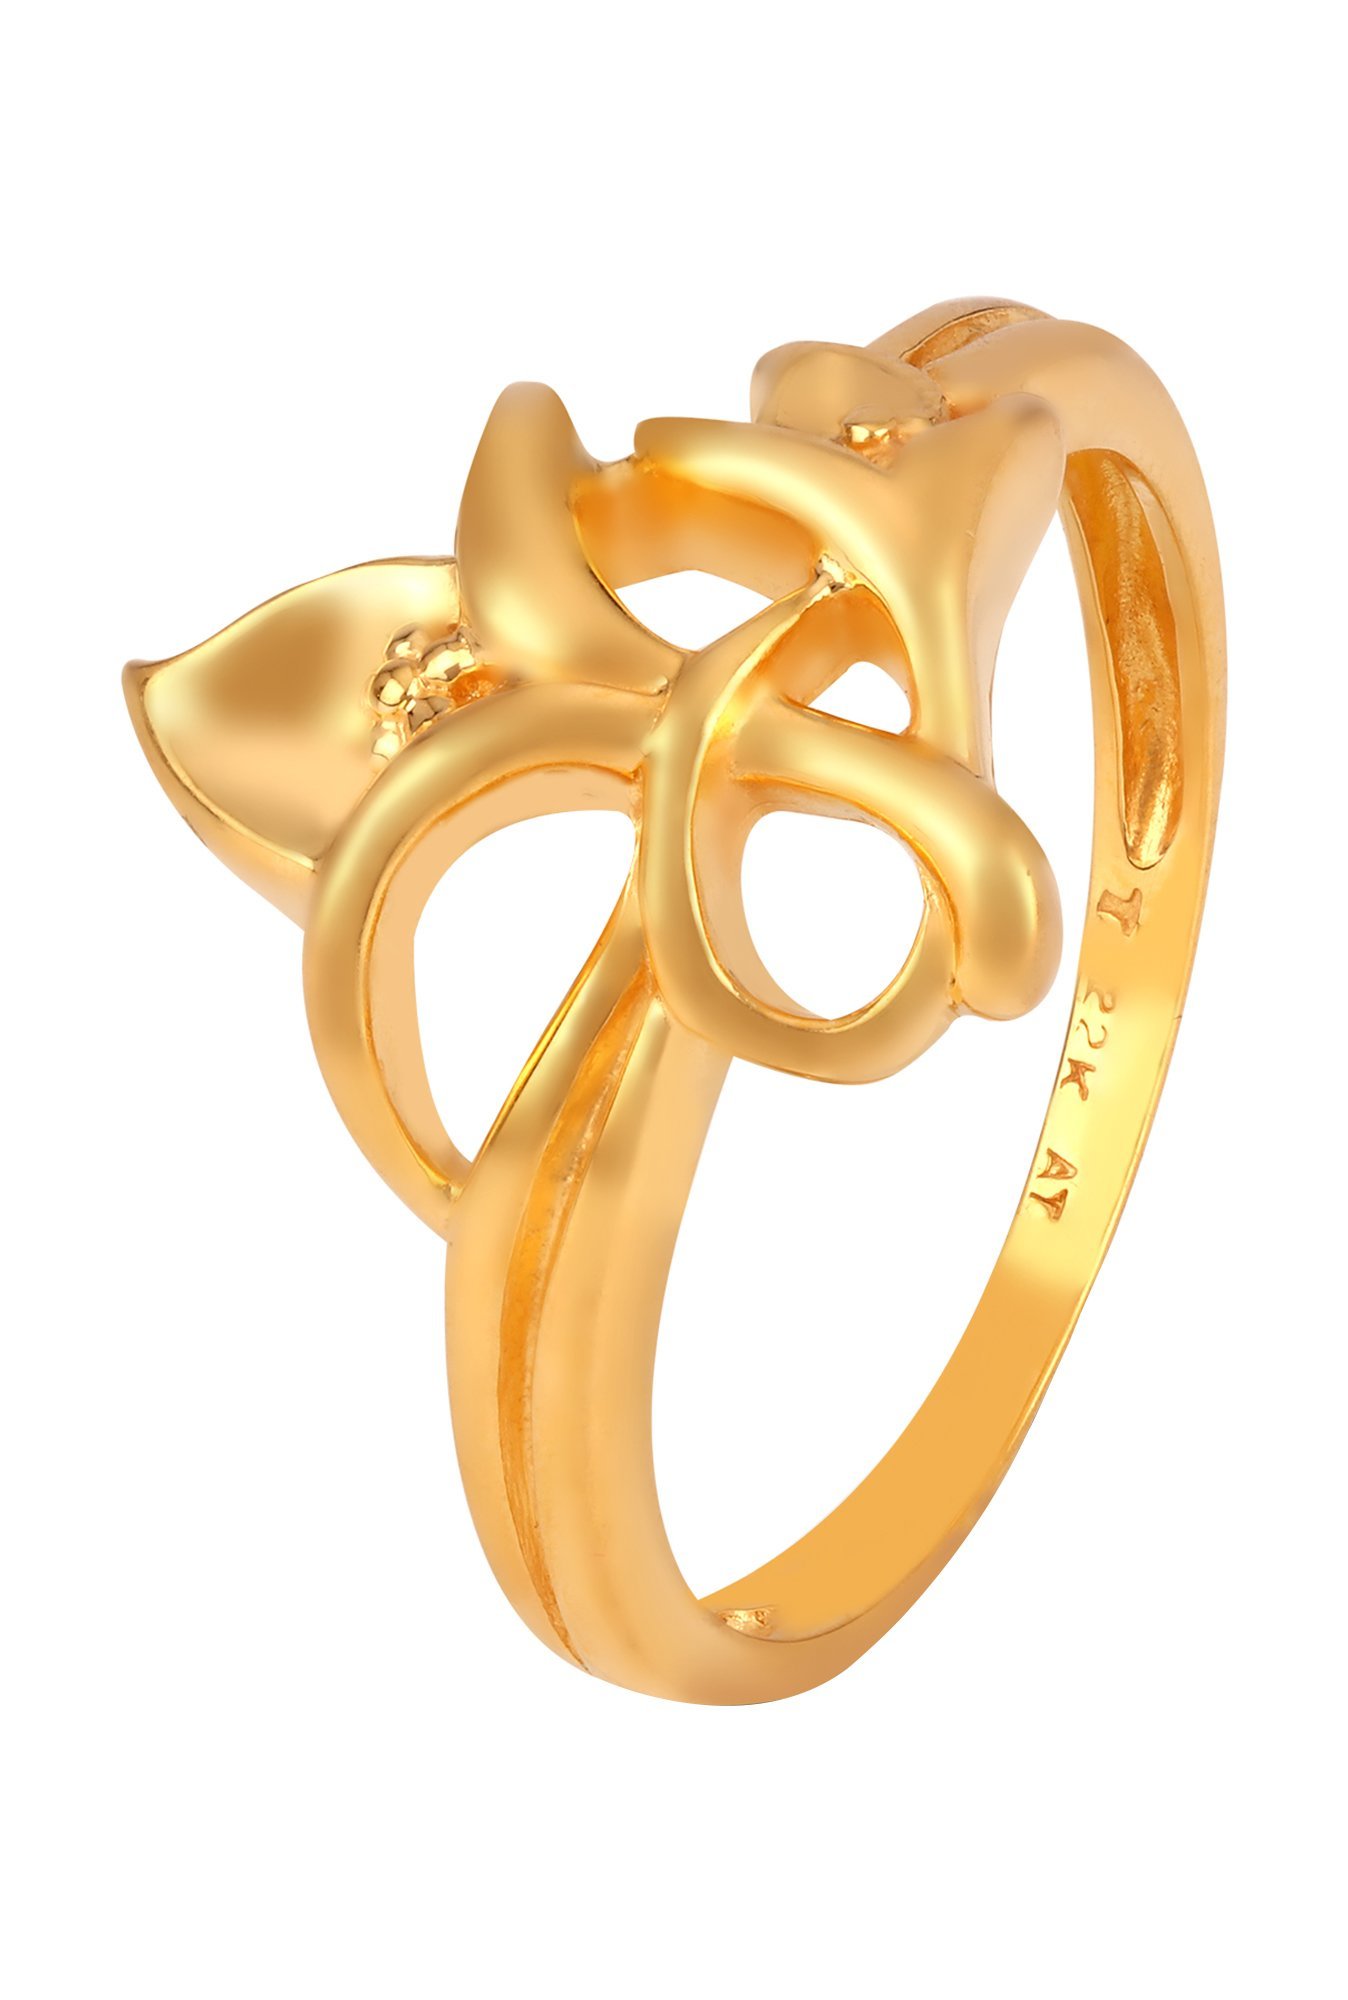 Eclectic Contemporary Gold Ring